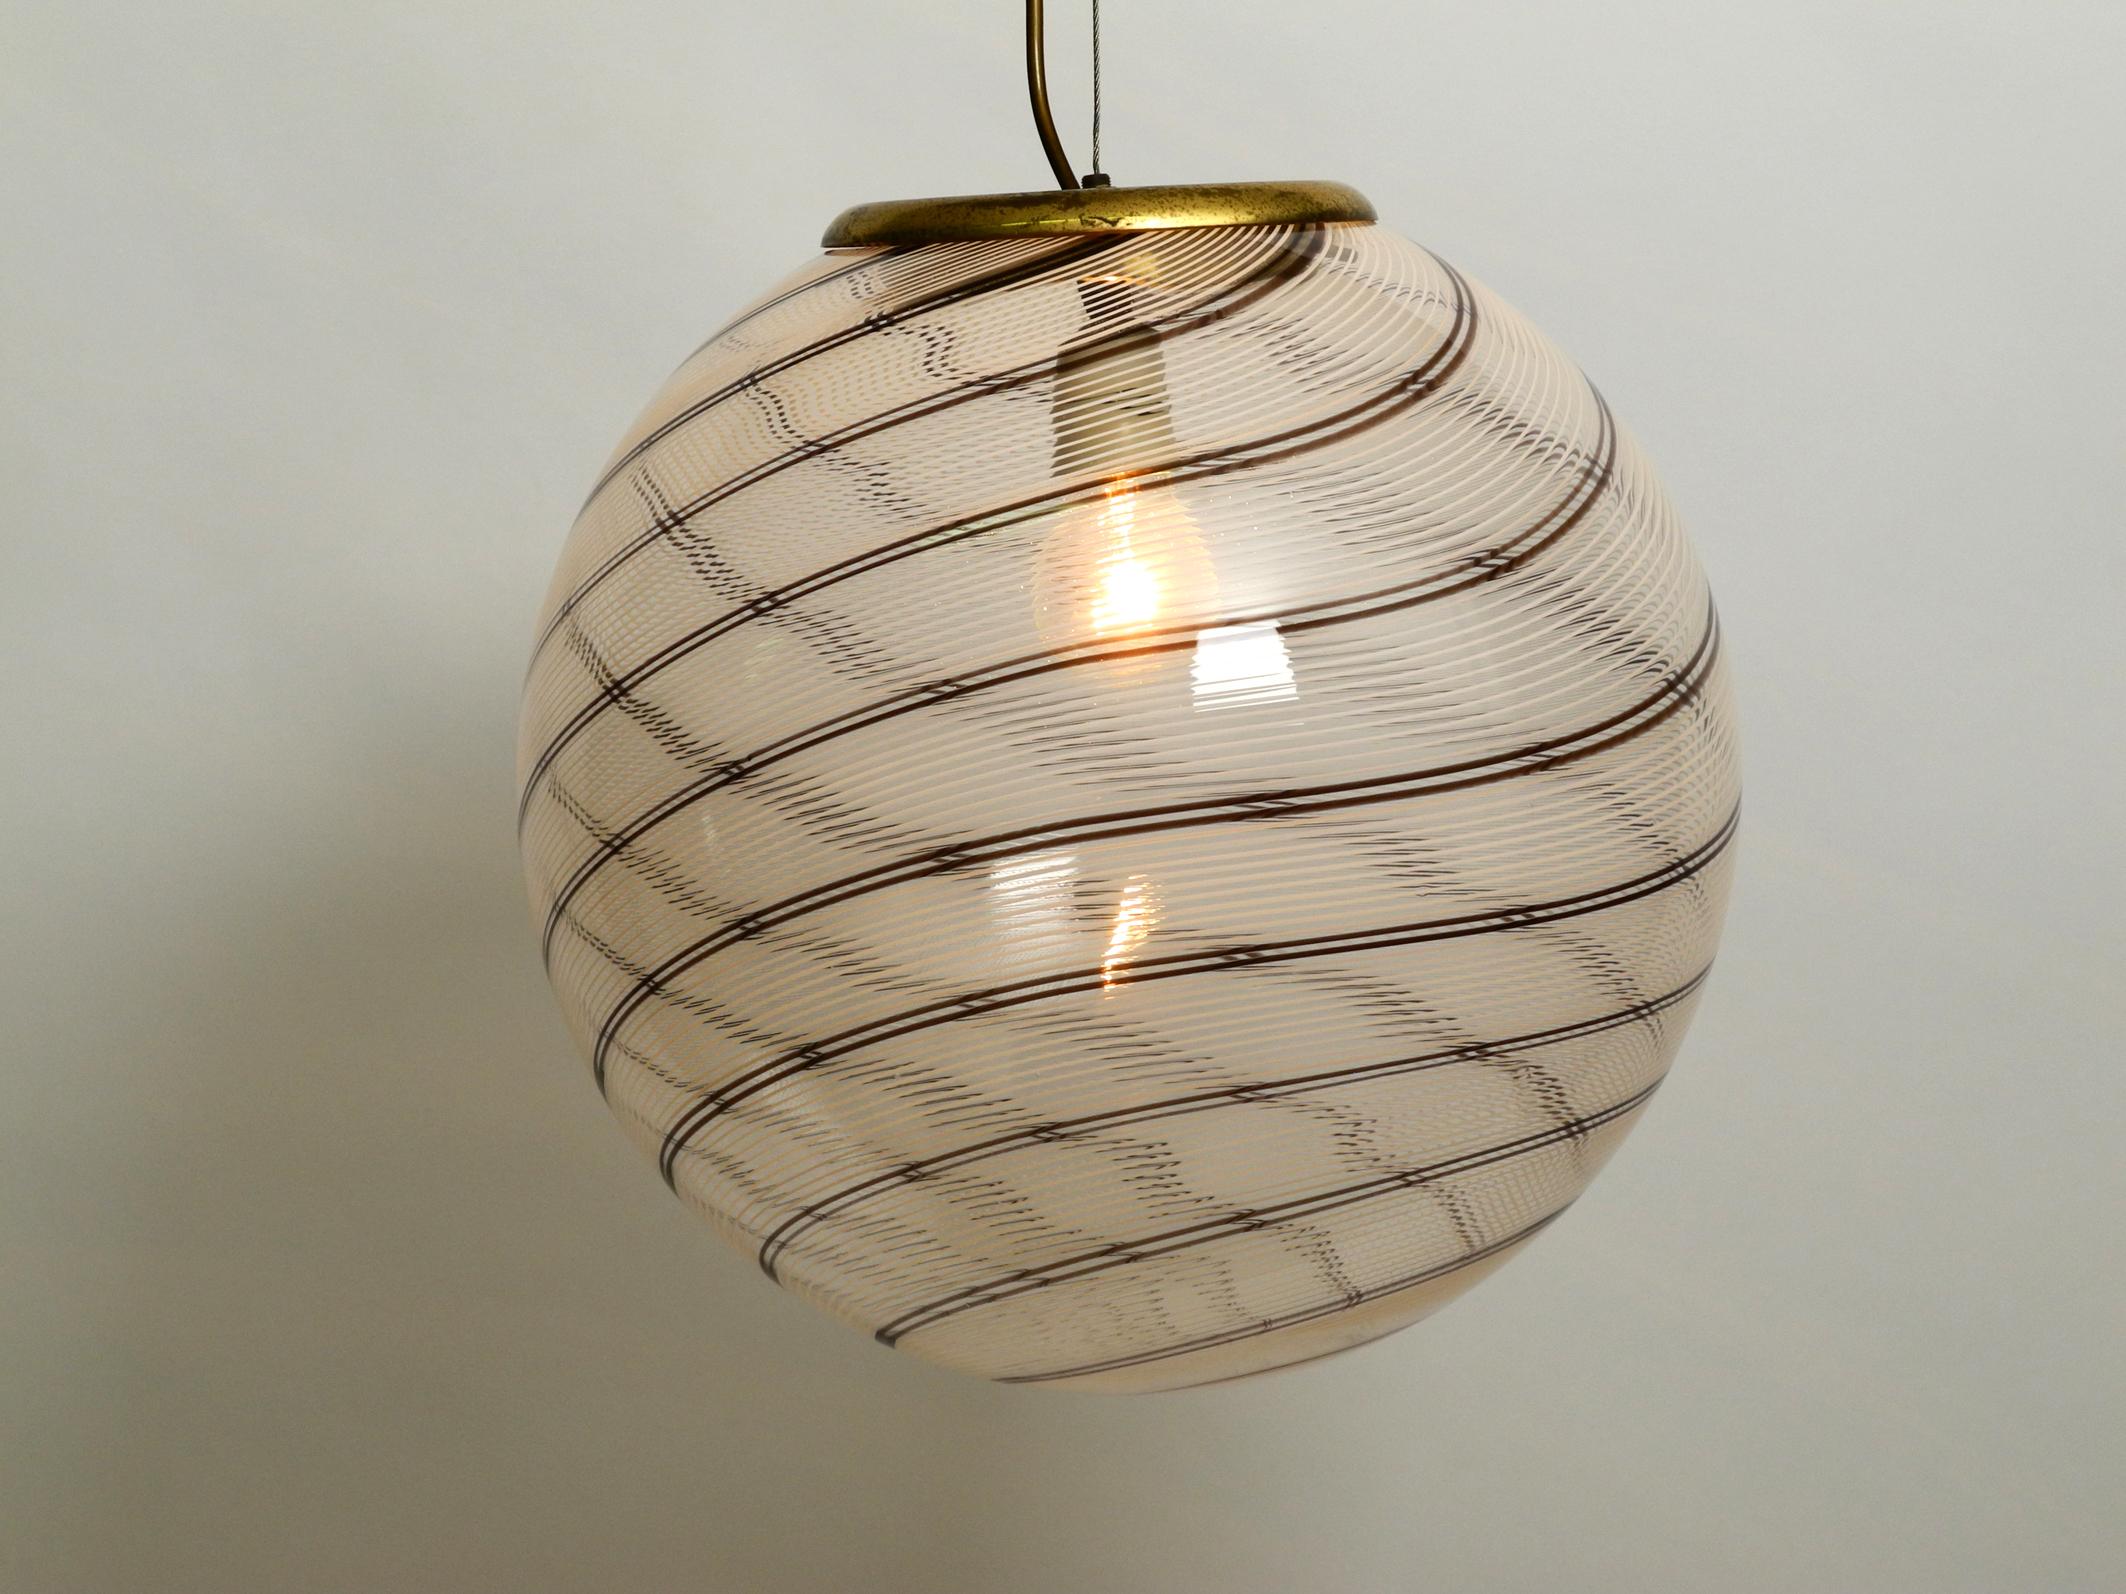 Beautiful large Italian Tessuto pendant lamp by Massimo & Lella Vignelli.
Made by Venini Italy from the 1970s.
Great Minimalist Italian design. Makes a very nice pleasant light.
The stripes on the wall only appear just with a clear glass light